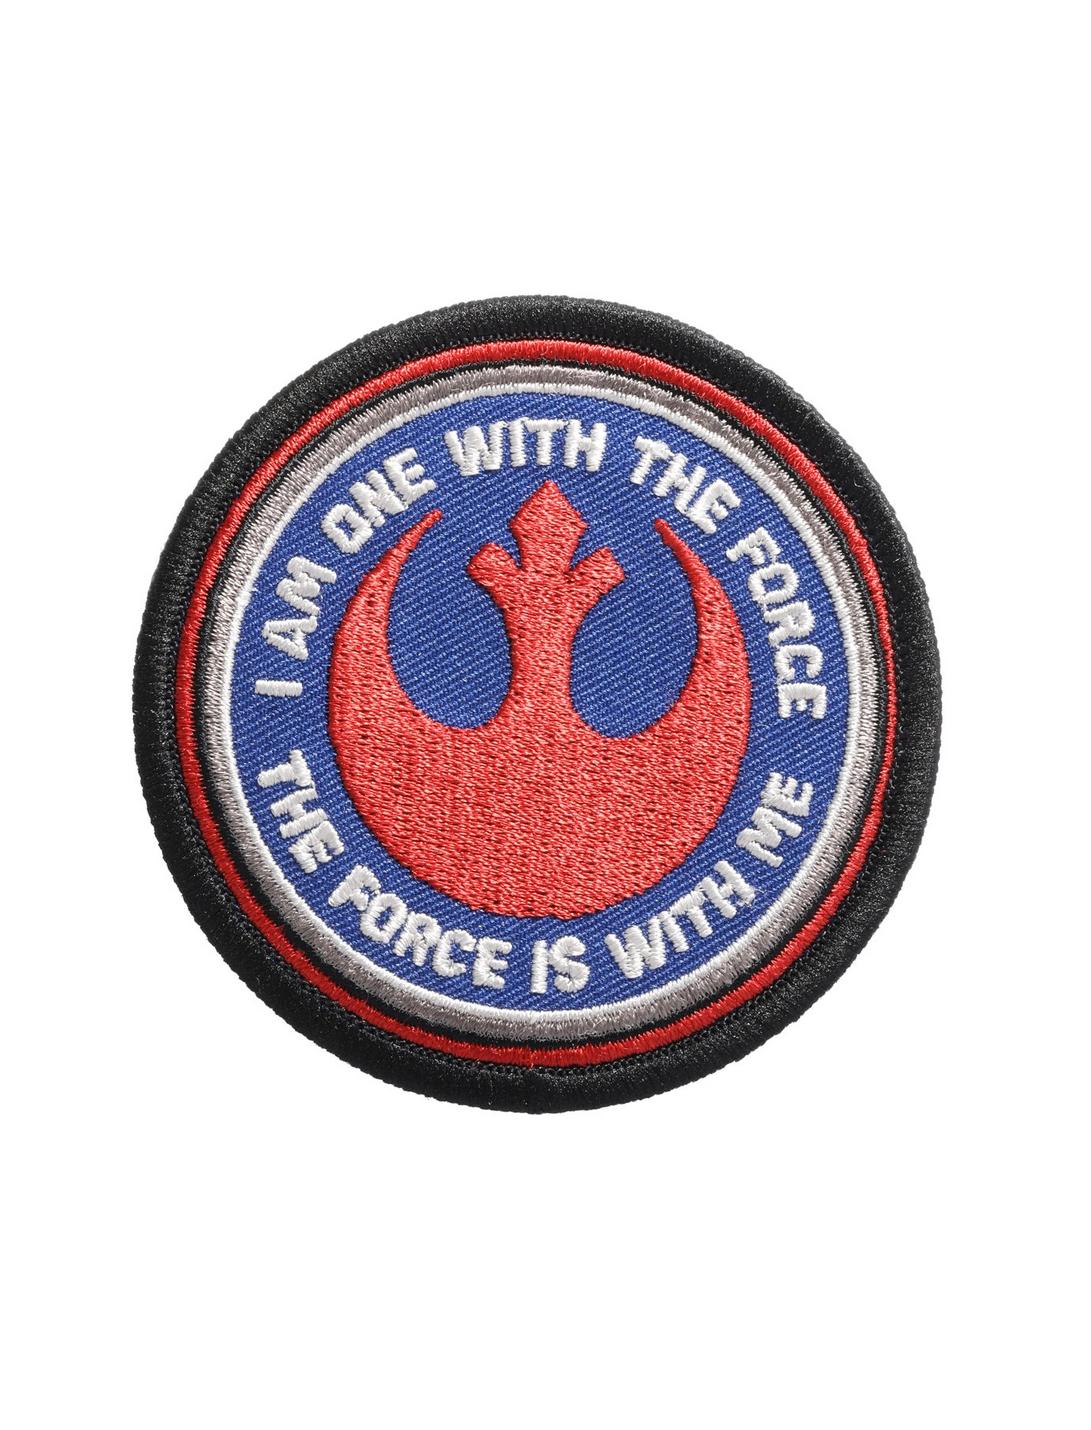 Star Wars: Rogue One Mantra Iron-On Patch, , hi-res